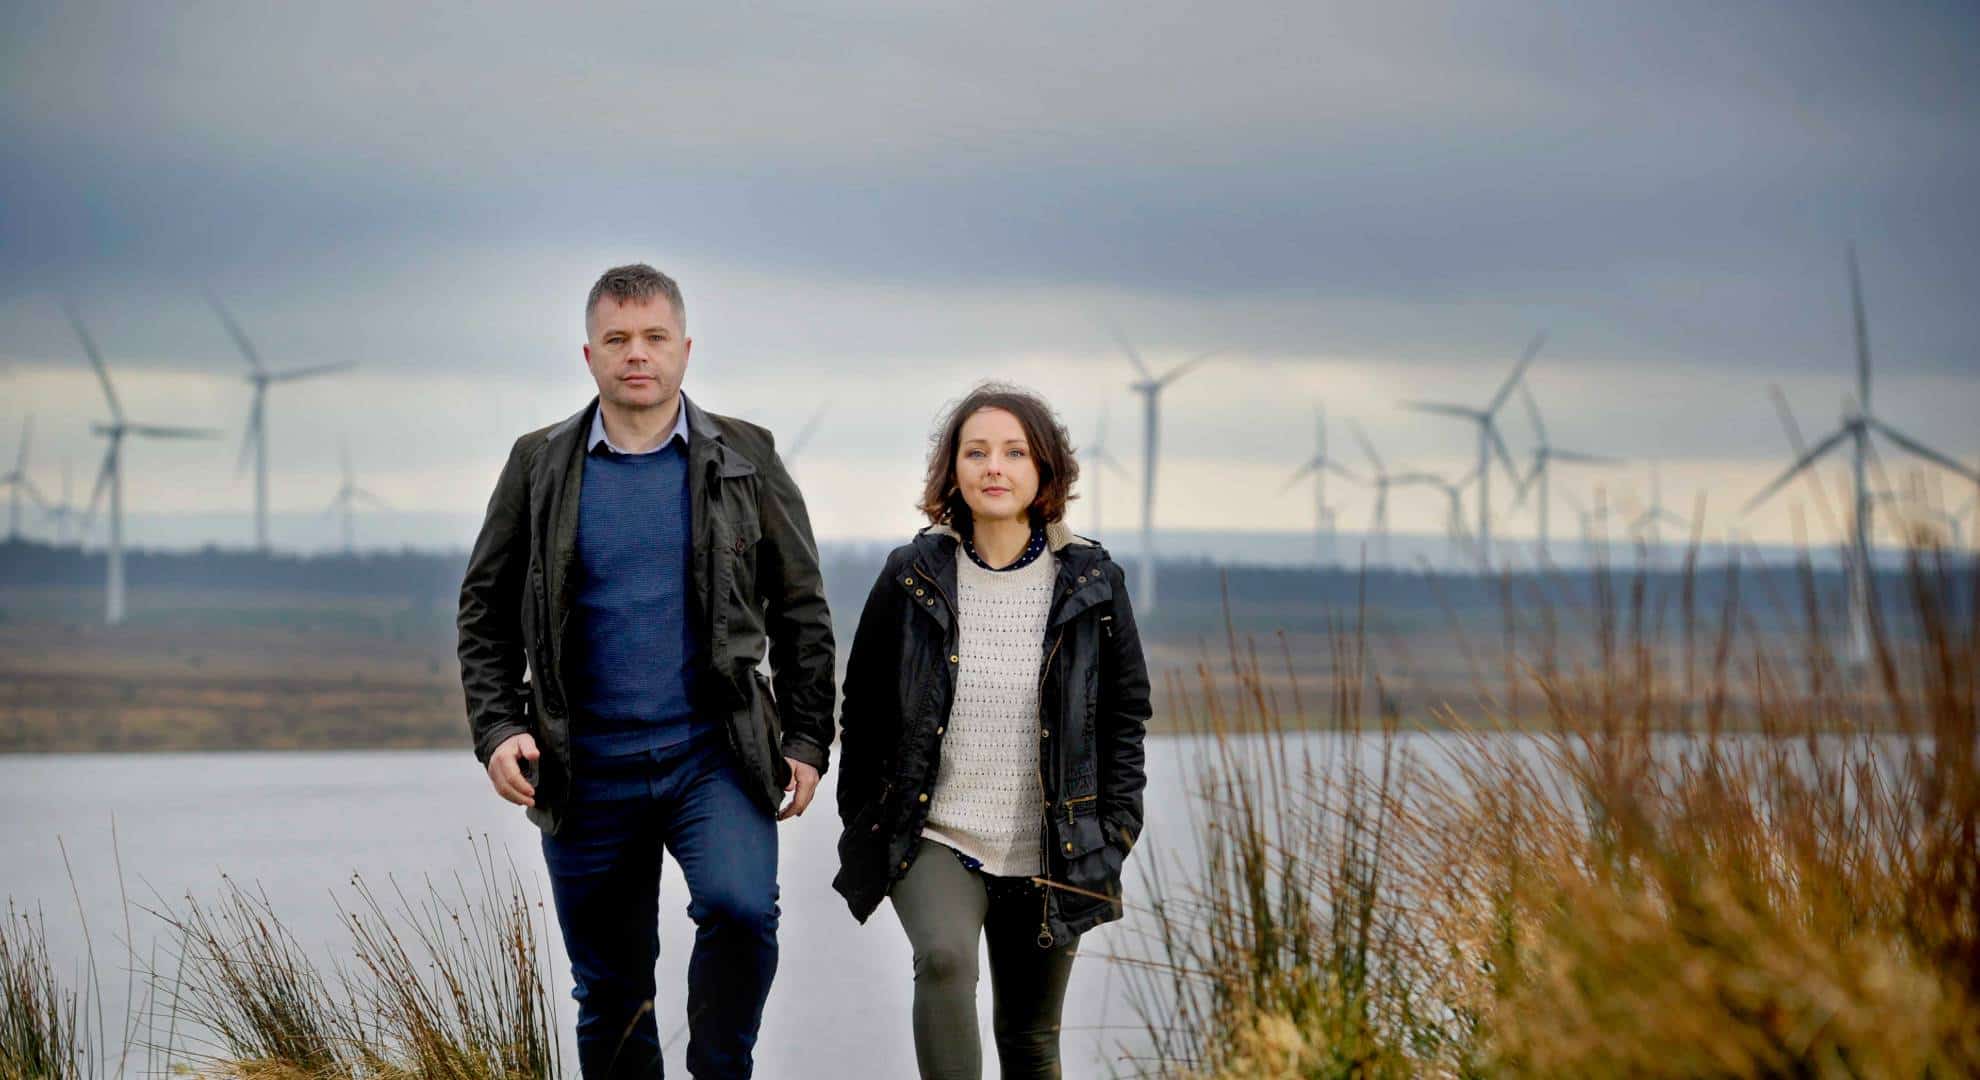 Photo of two people from ReBlade walking outdoors with wind turbines in the background